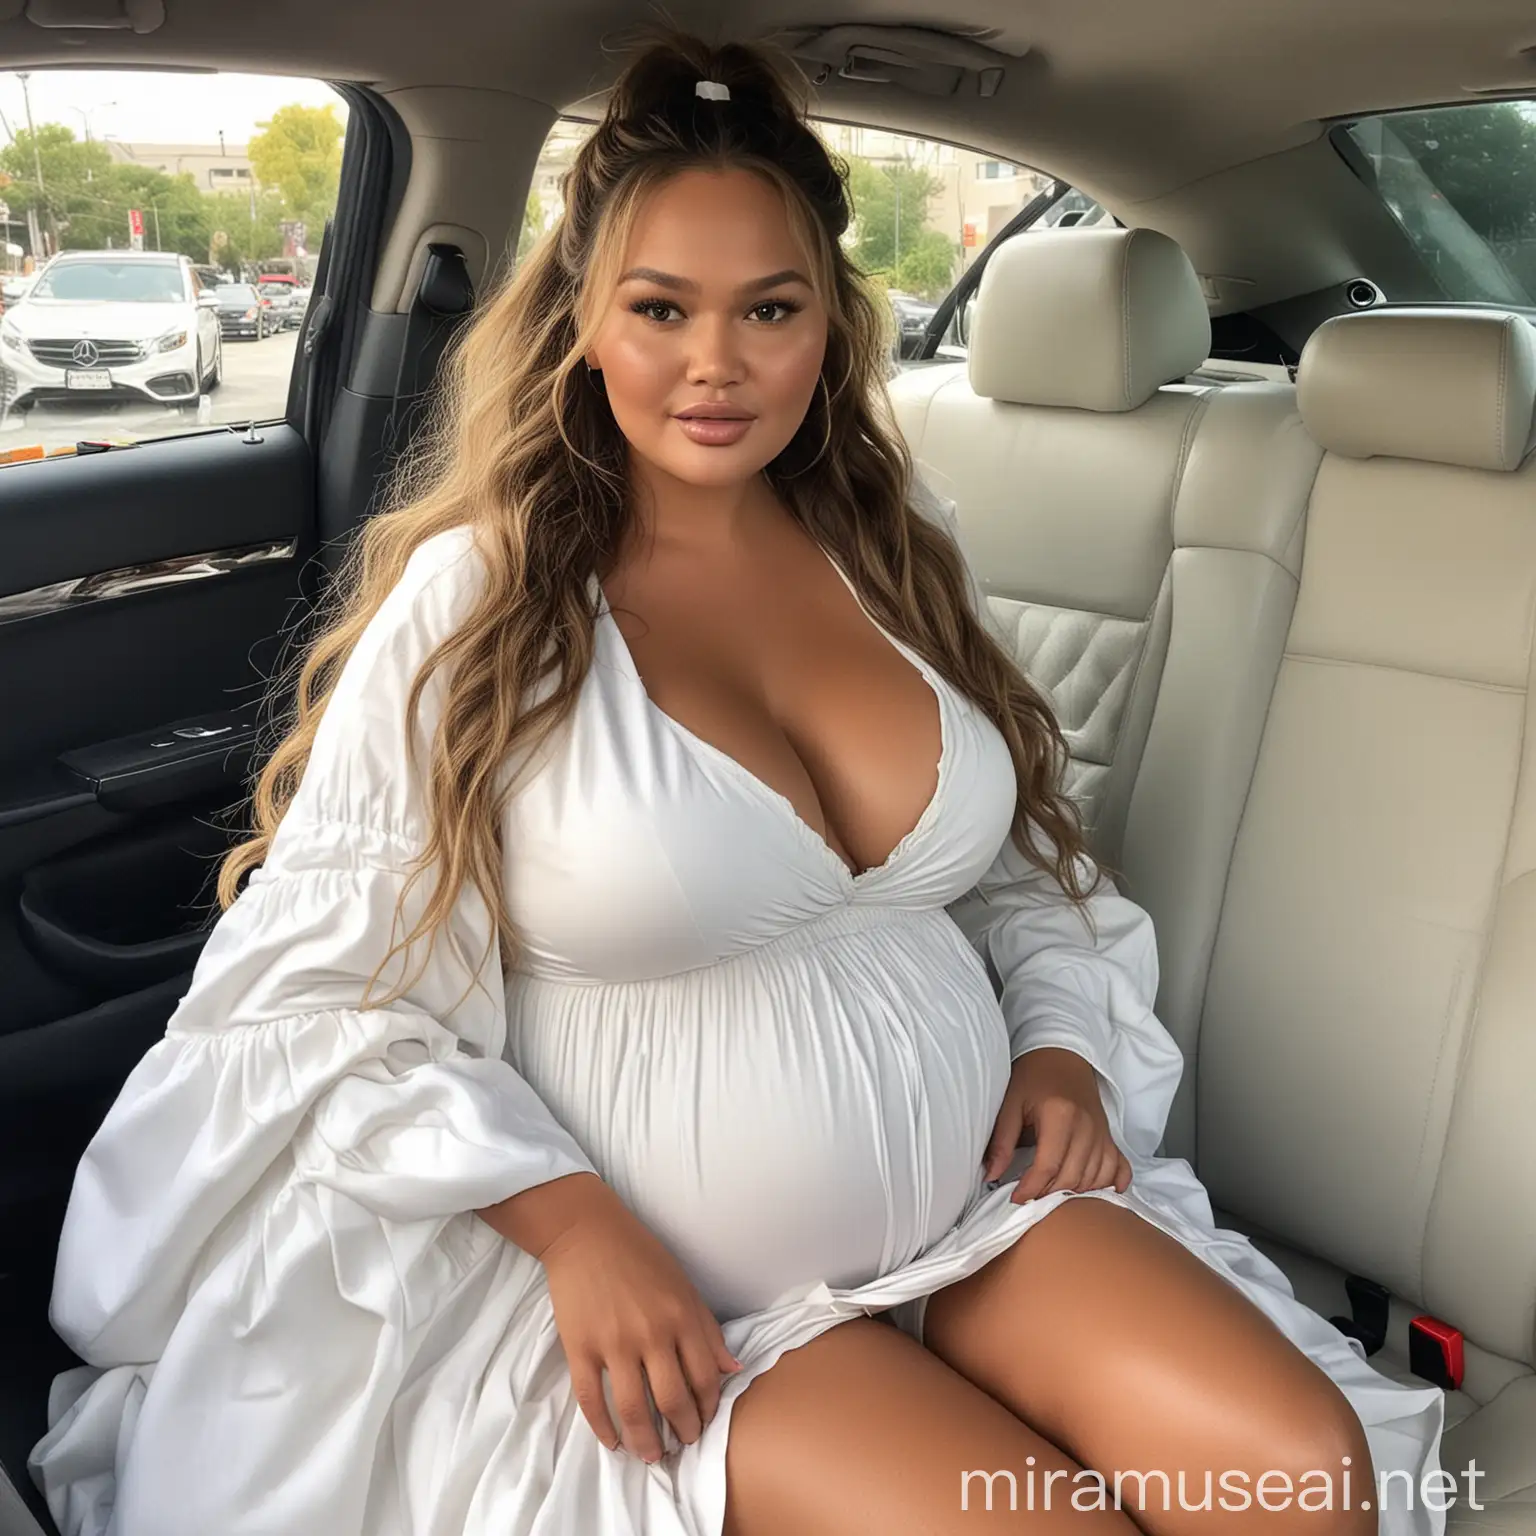 Chrissy Teigen dressed in white with big pregnant belly in the back seat of a car, bbw, giant breasts, showing massive cleavage, zoomed in from the waist up, big long kinky hair in a ponytail